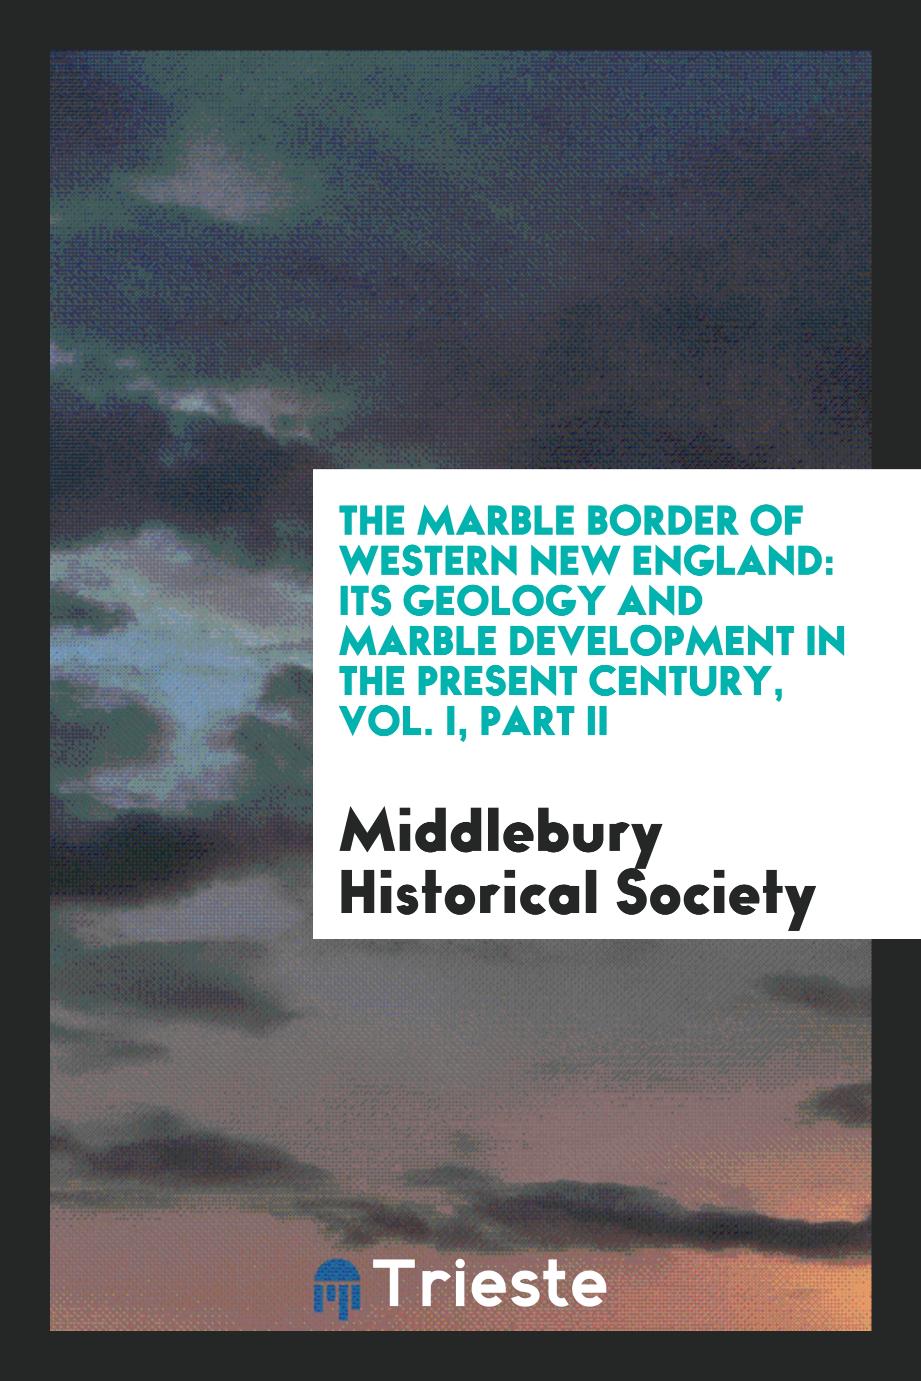 The Marble Border of Western New England: its geology and marble development in the present century, vol. I, part II